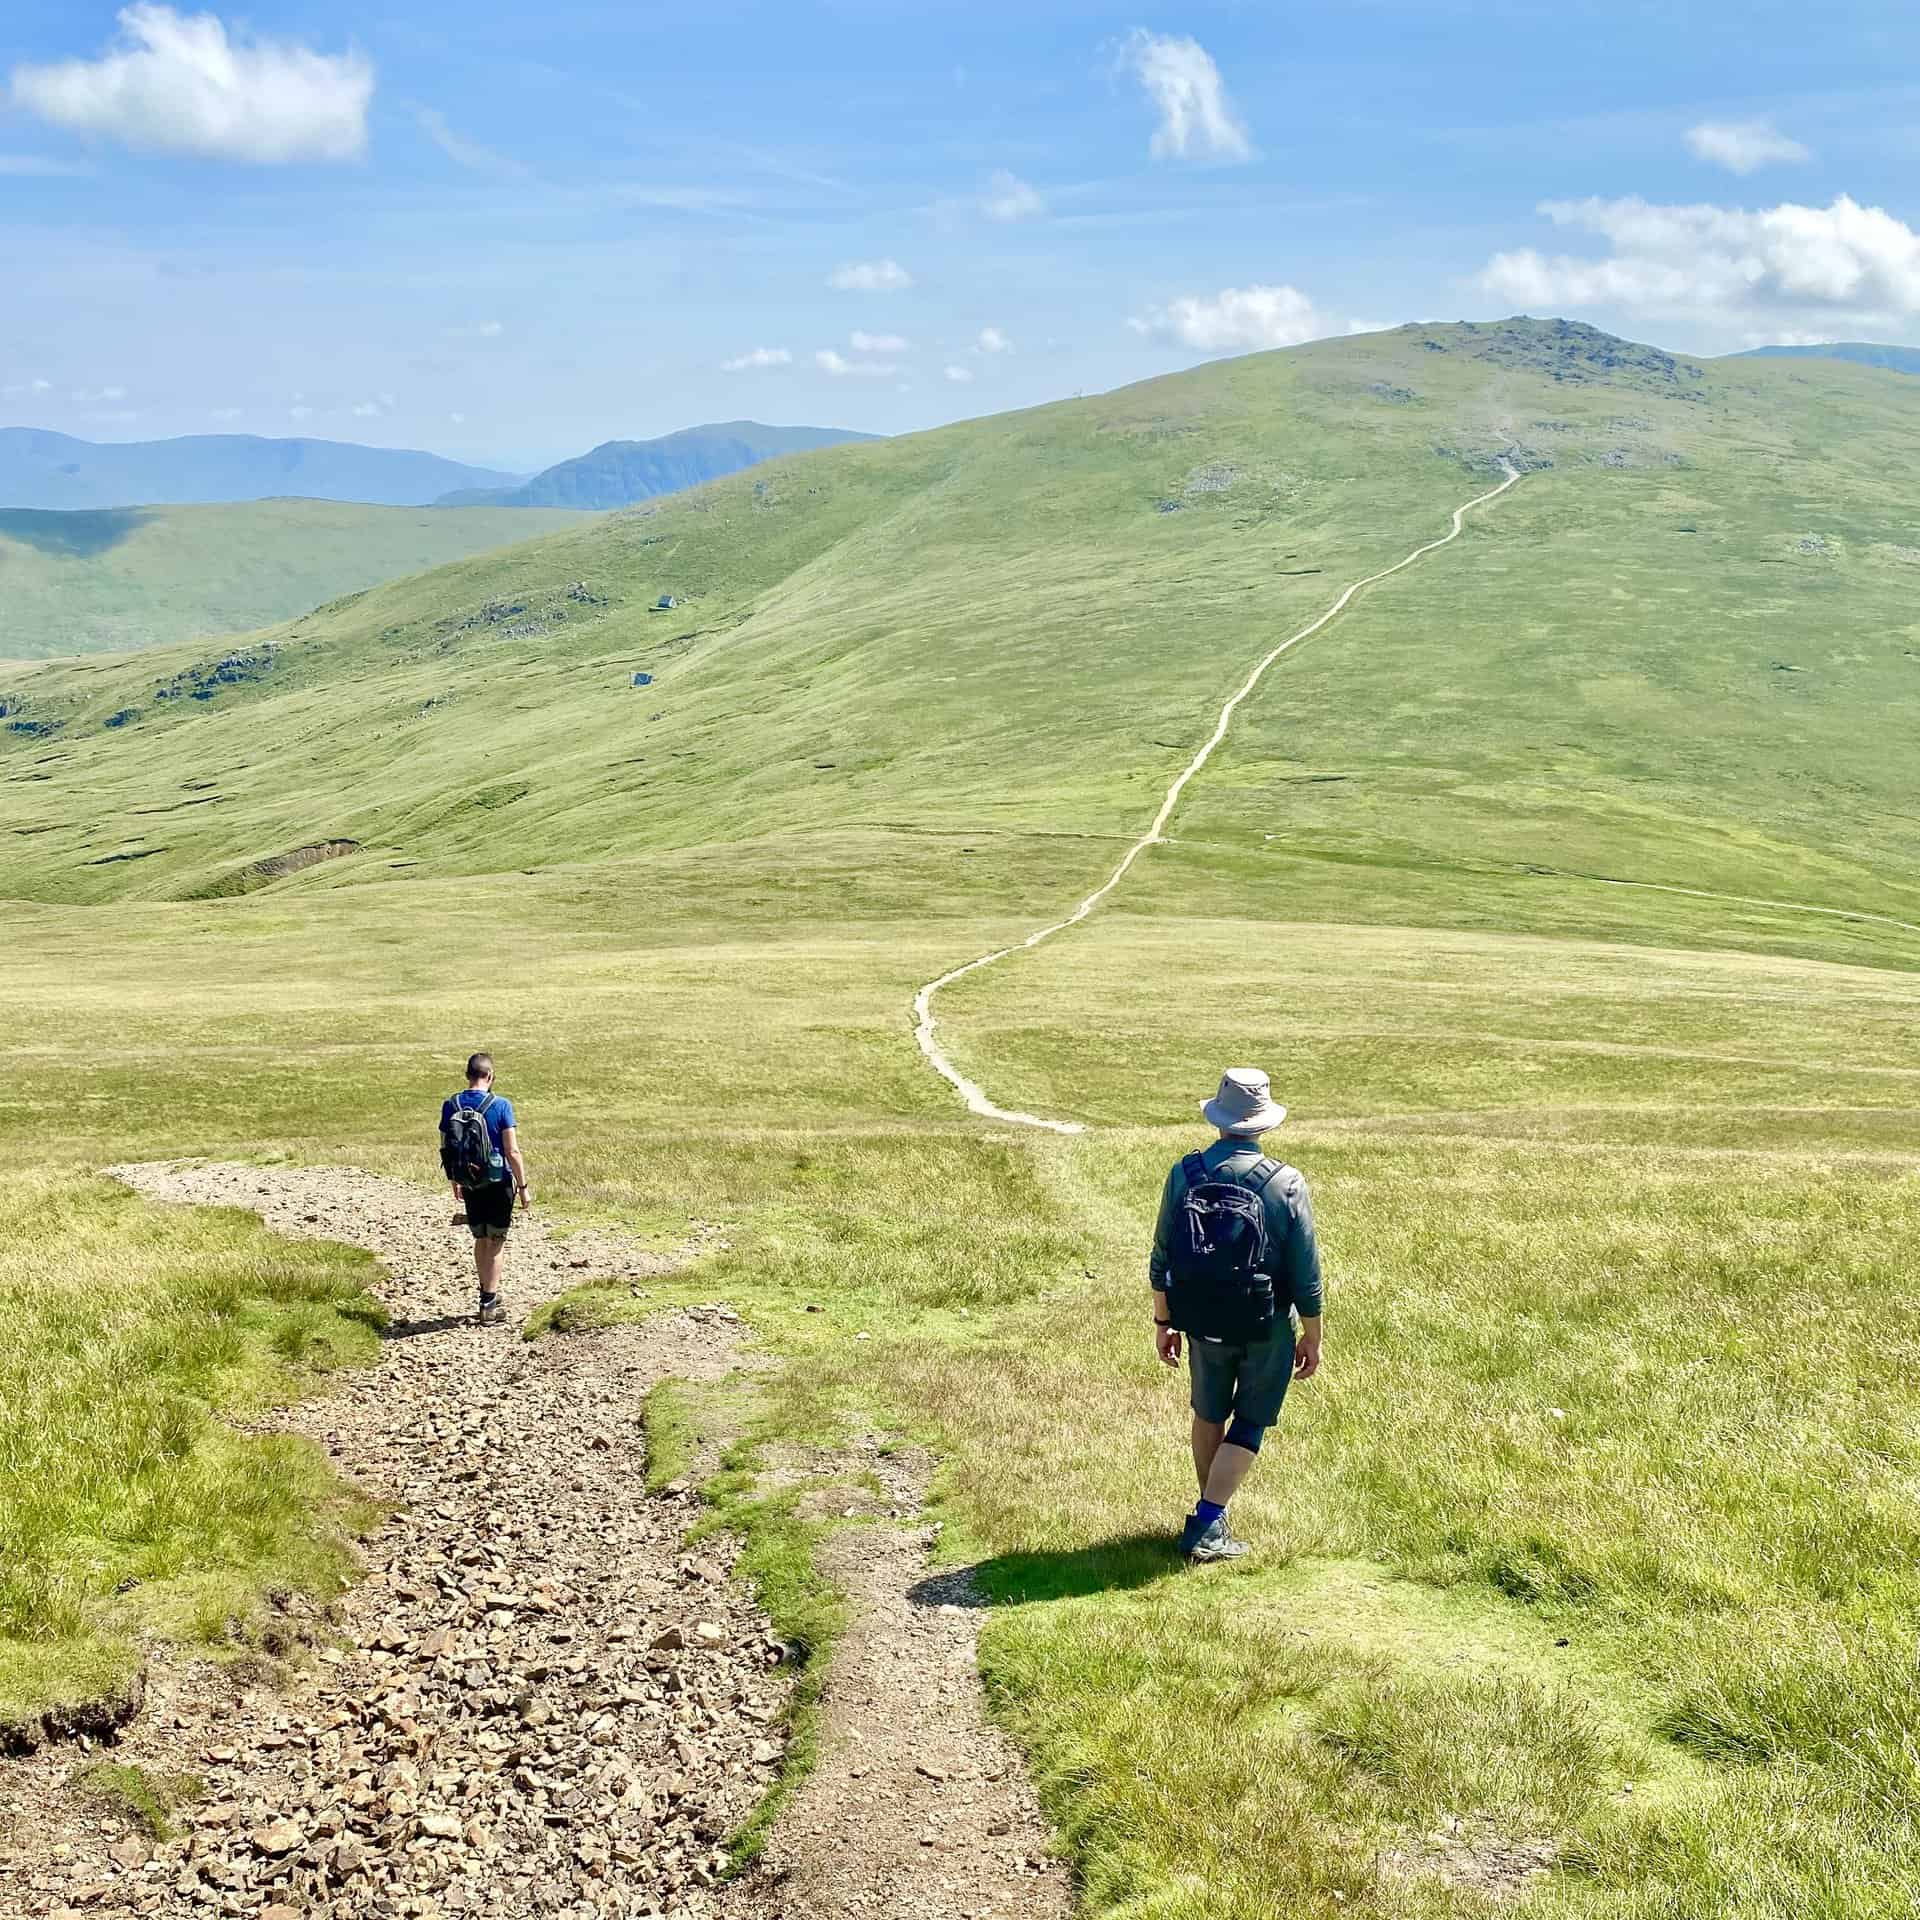 Get ready for a tall tale, folks! In the heart of the English Lake District, where emerald hills meet azure skies, there exists a legendary trio, known as 'The Three Dodds'. They are Great Dodd, Watson’s Dodd and Stybarrow Dodd.